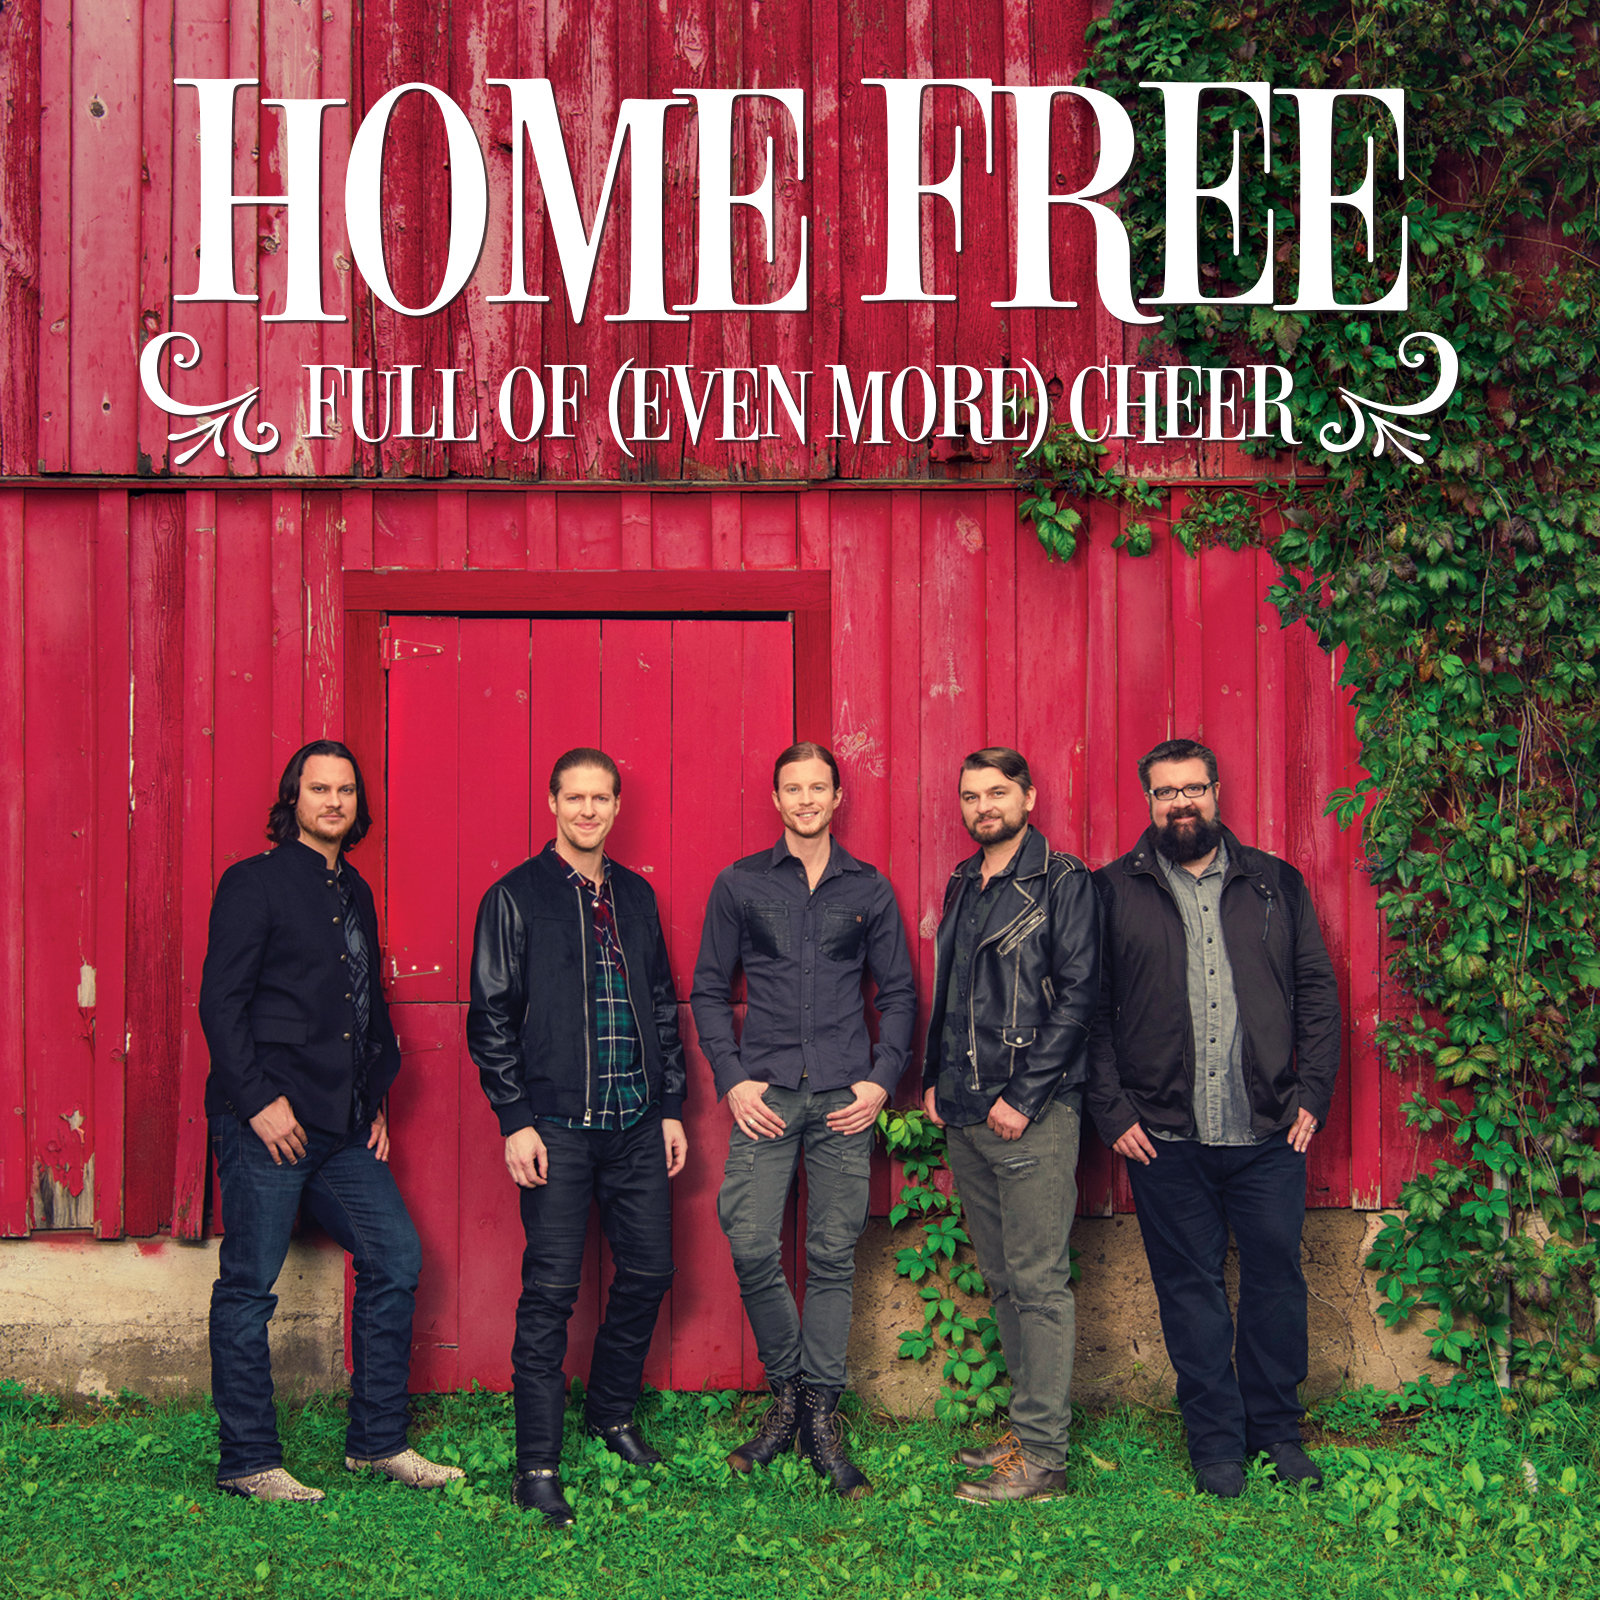 Home Free One Hundred Million Views on YouTube Country Music Rocks